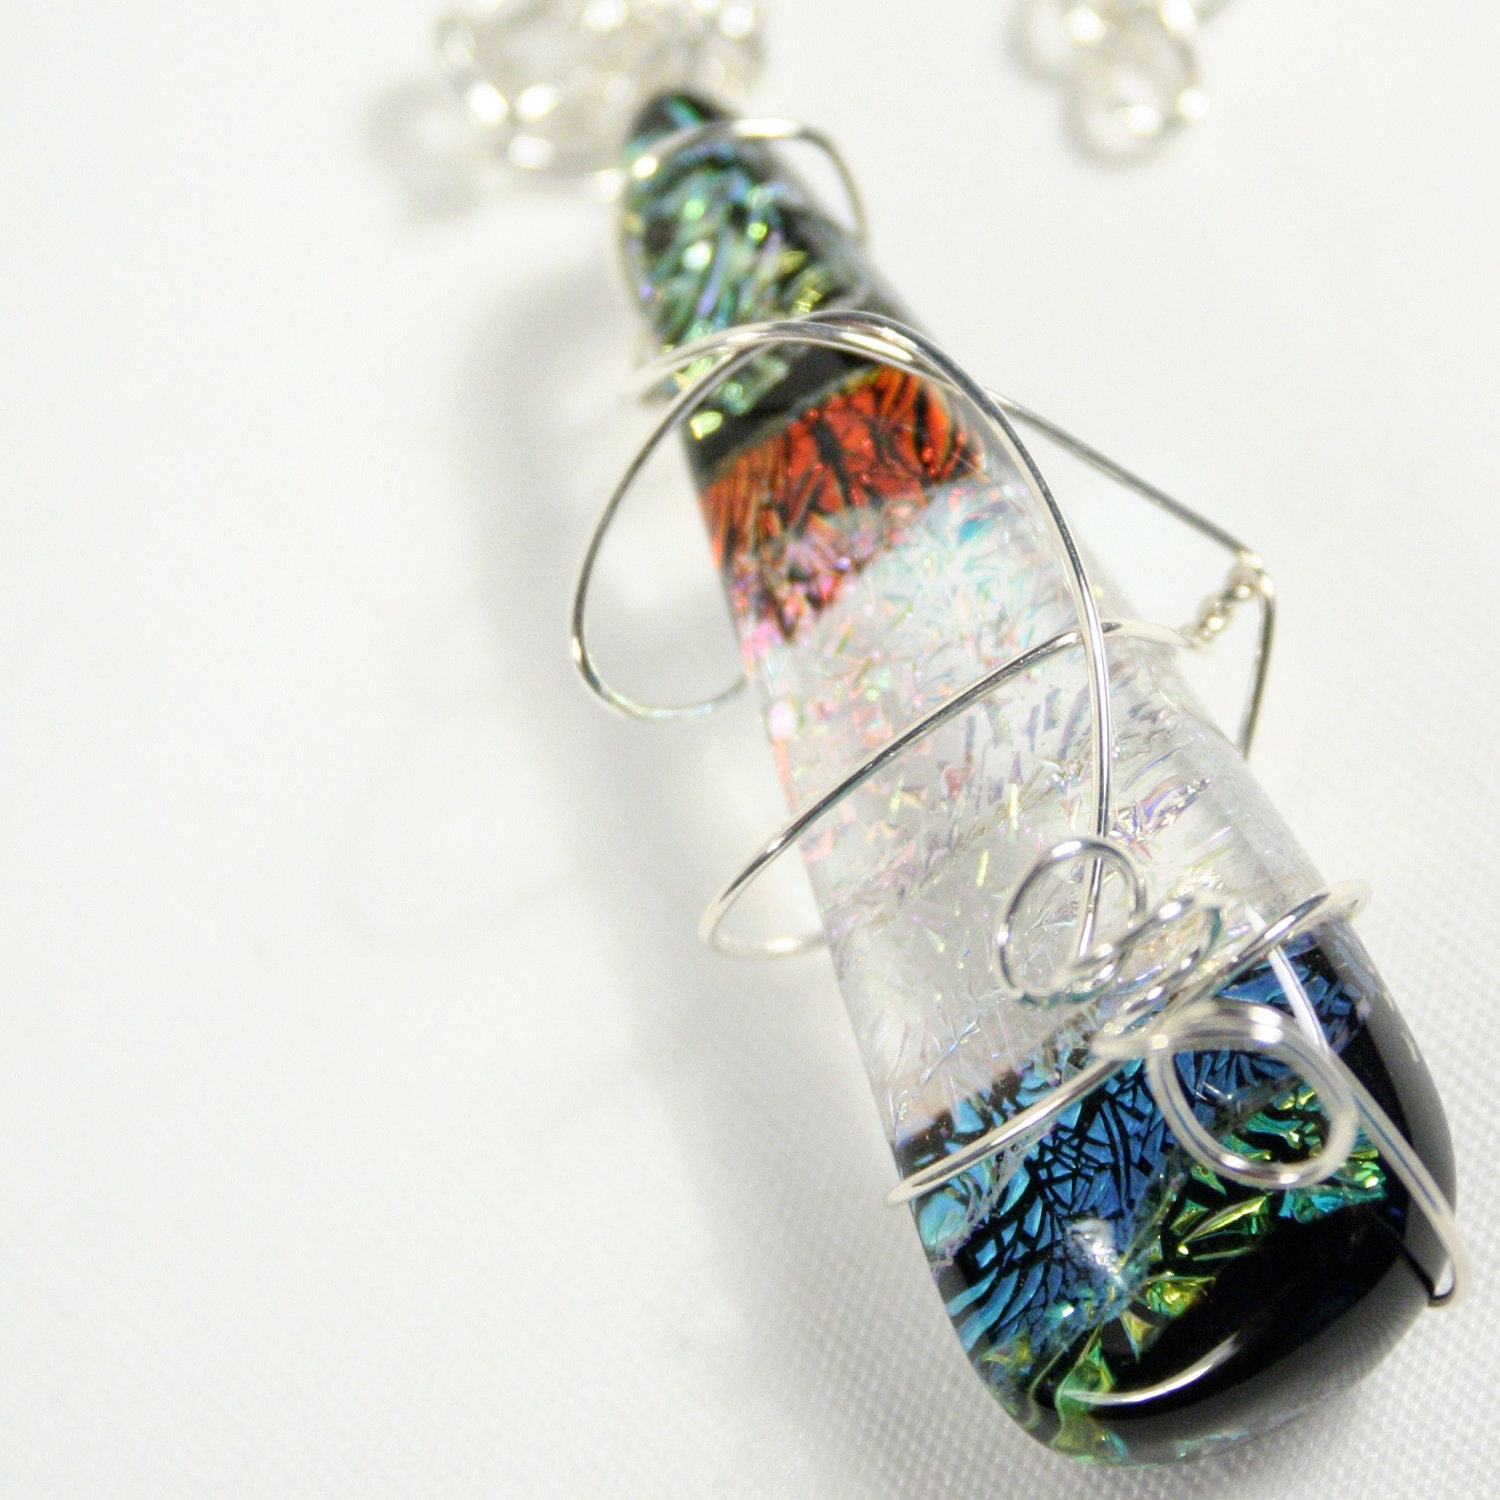 Necklace: Dichroic glass necklace, blue necklace, wire-wrapped glass necklace